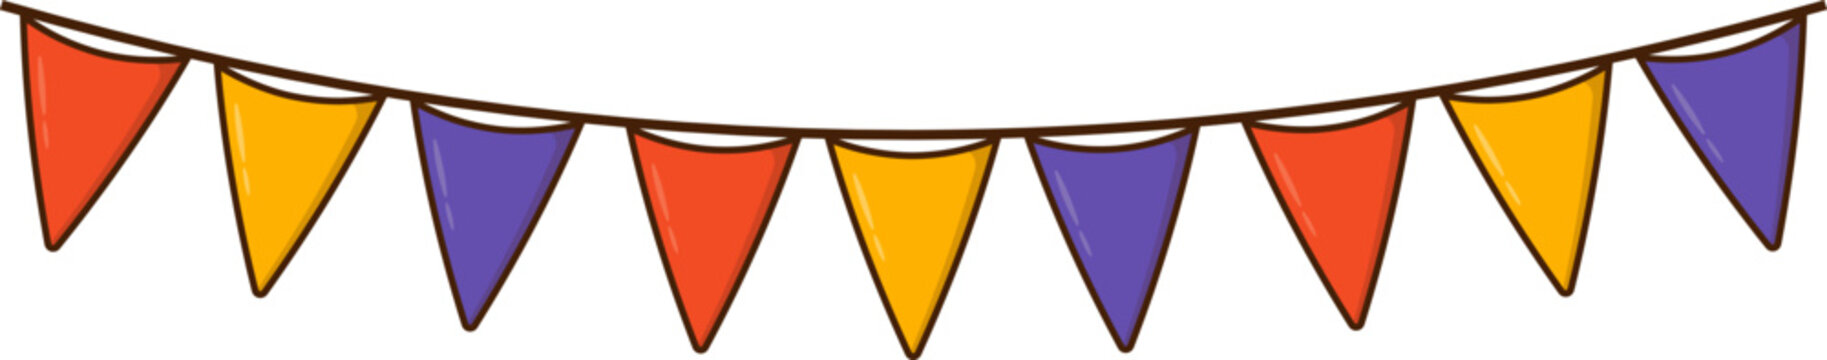 Bunting Flags Decoration